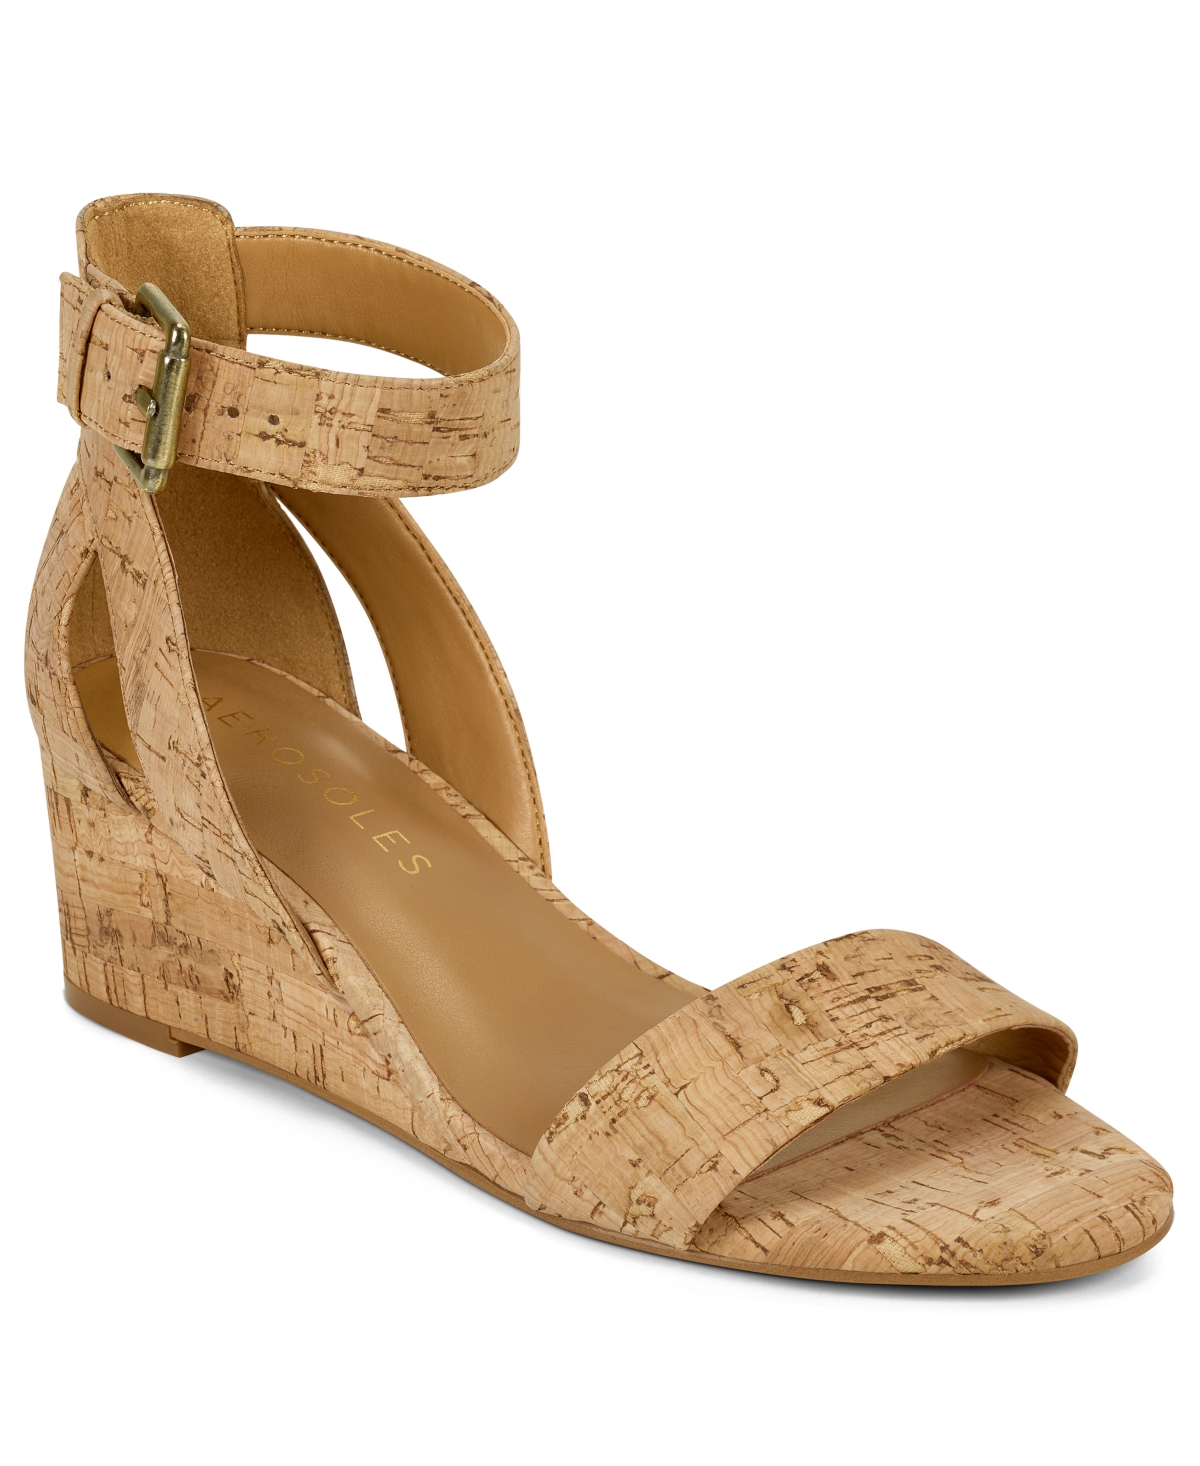 UPC 887039936186 product image for Aerosoles Willowbrook Wedge Sandals Women's Shoes | upcitemdb.com